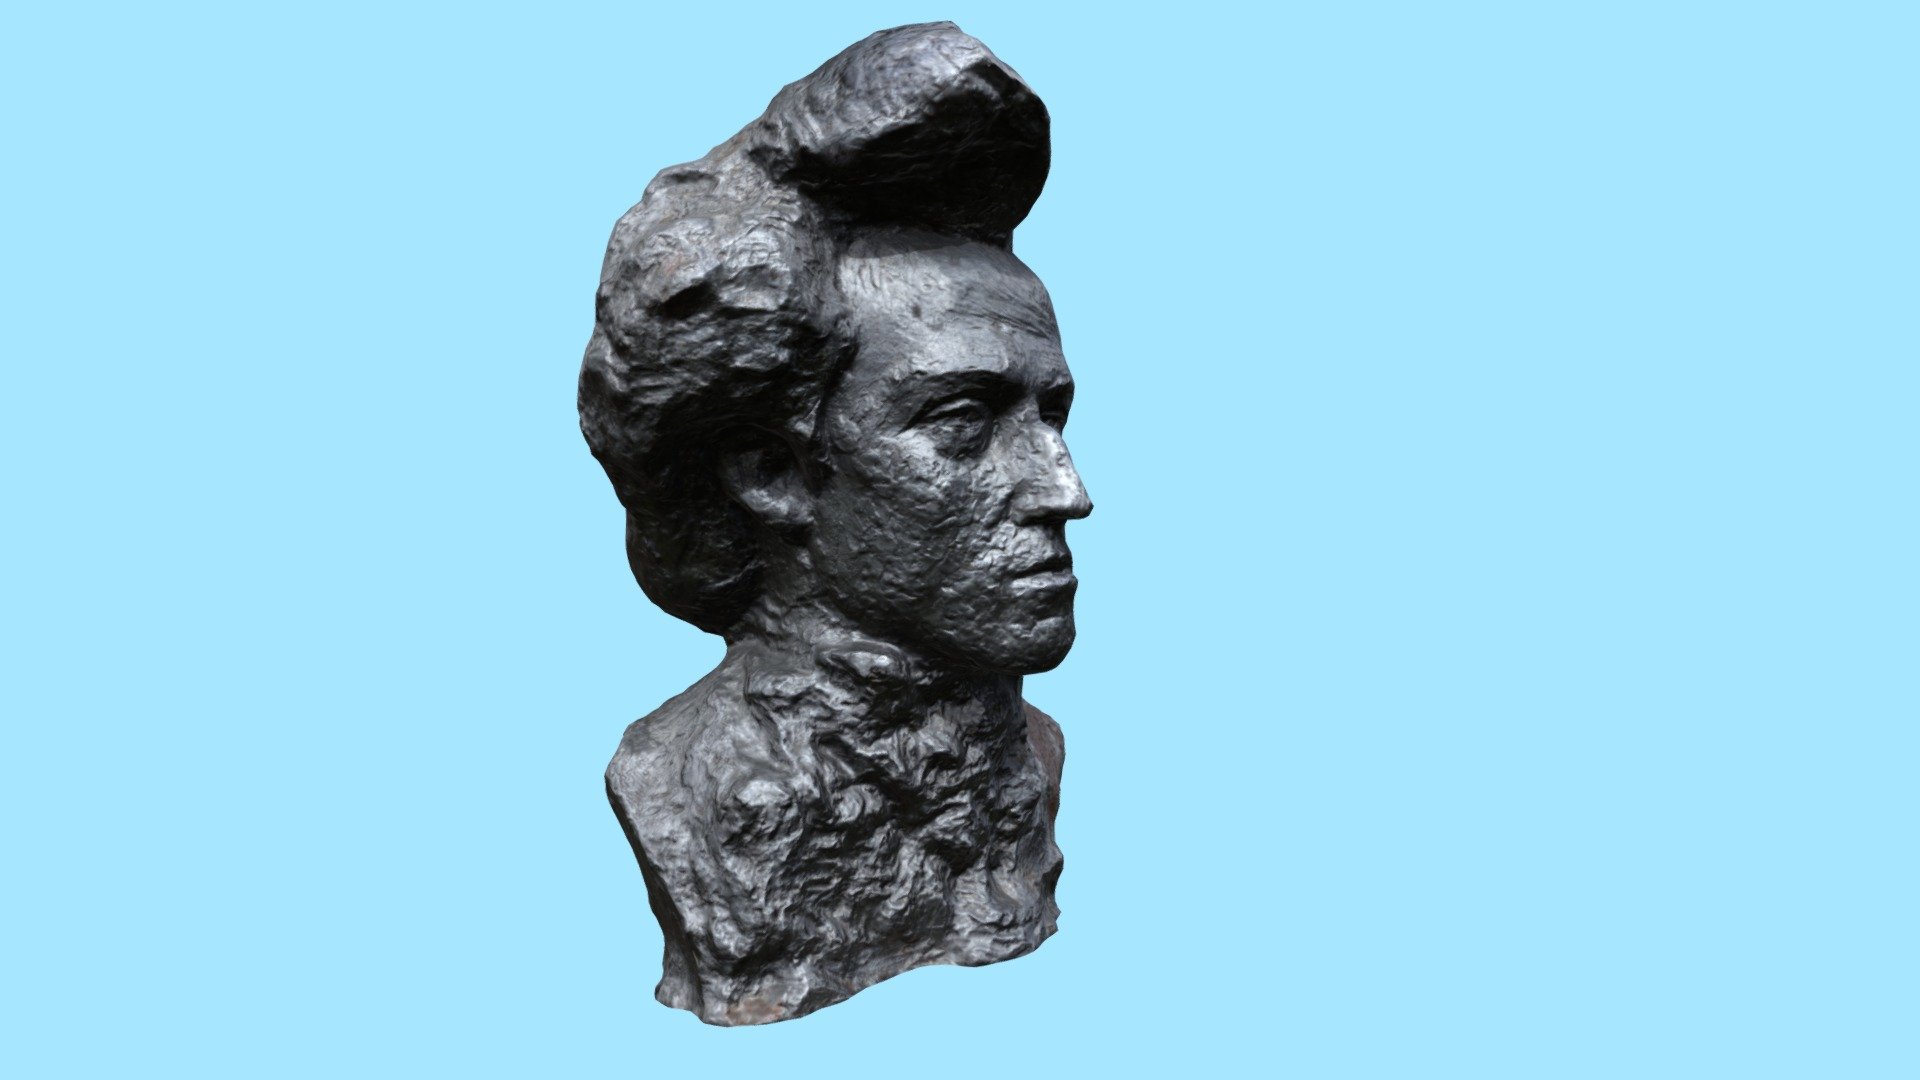 Chopin Sculpture - VR Gallery Game ready